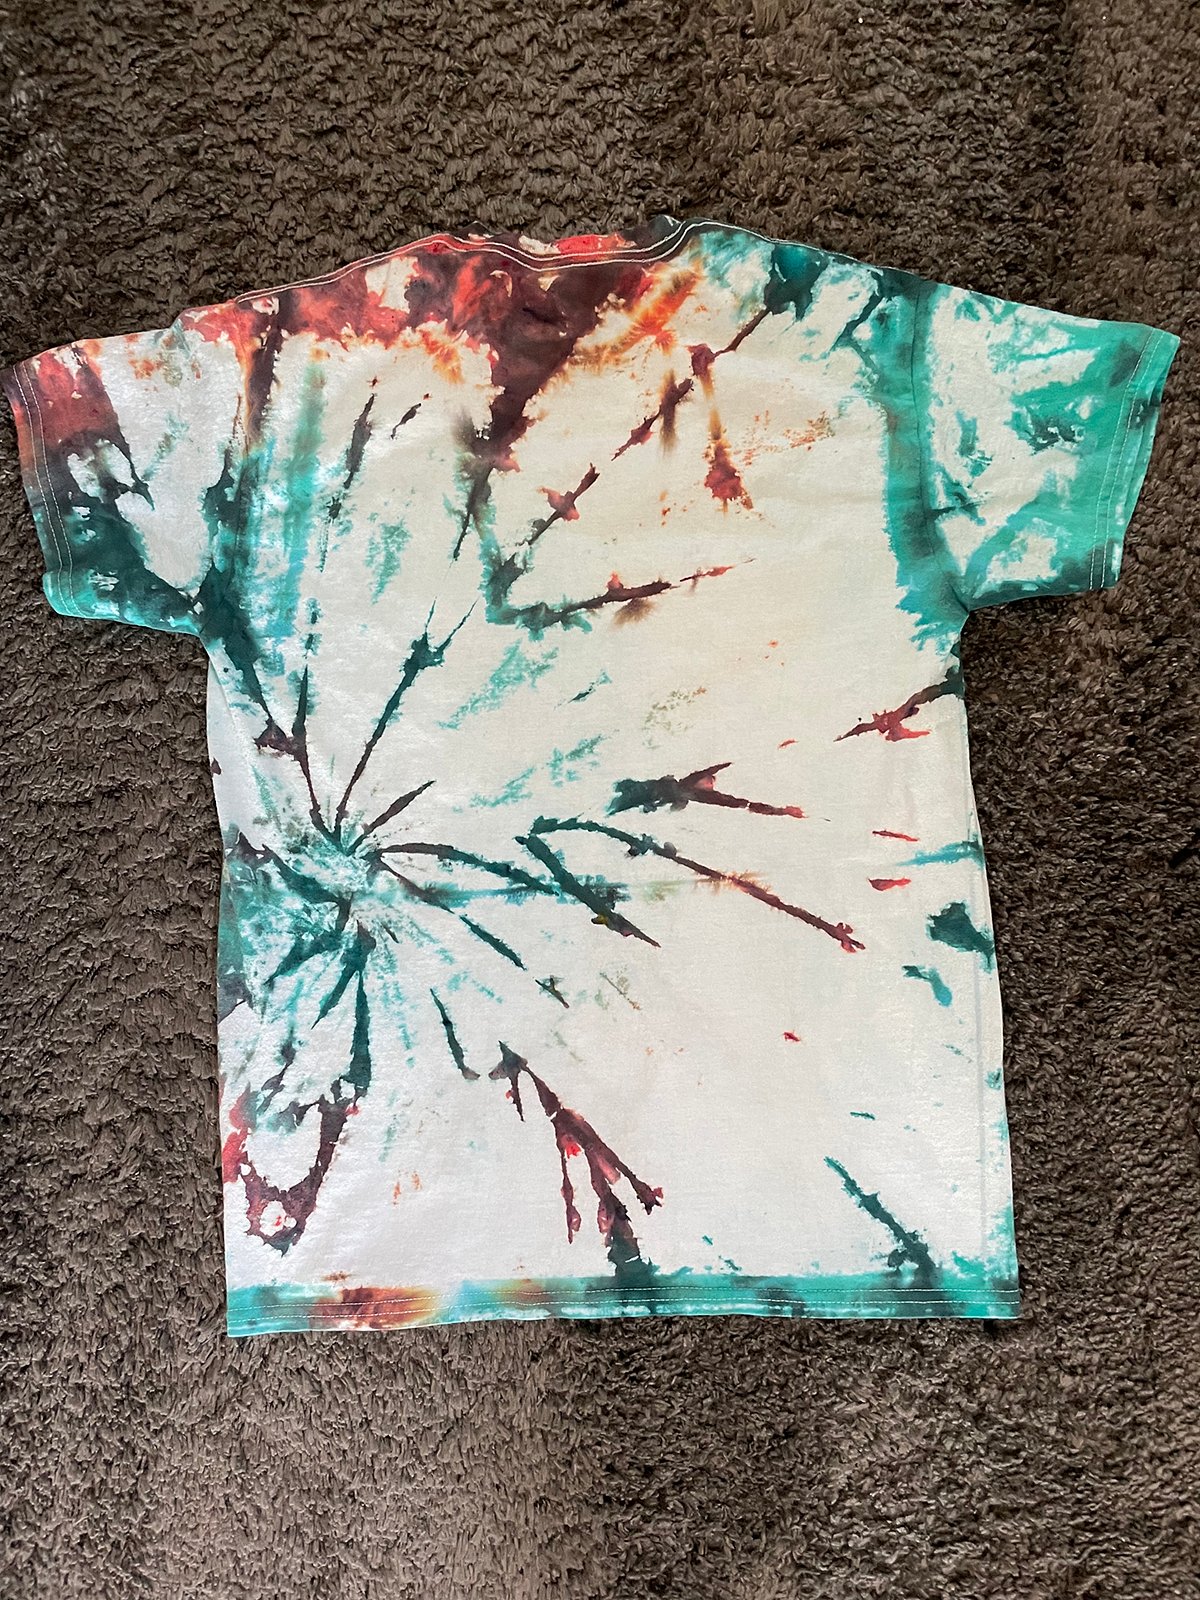 Completed spider DIY tie dye t shirt